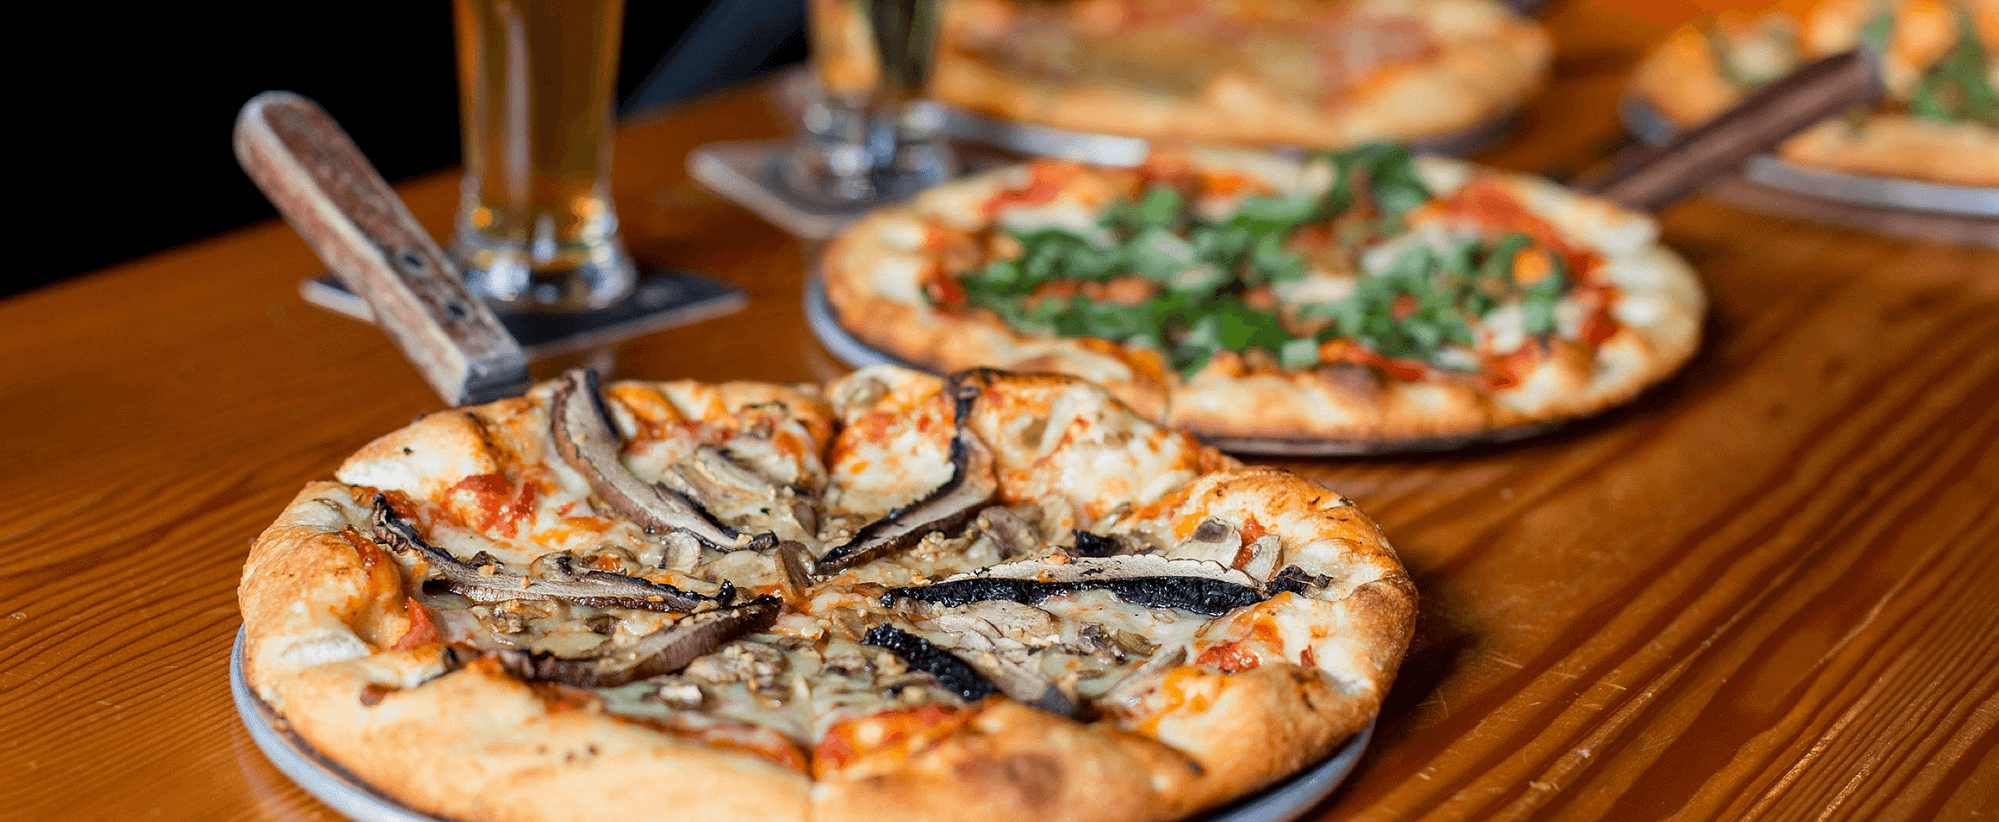 Four tasty lookig pizzas served with beer on a wooden restaurant table.